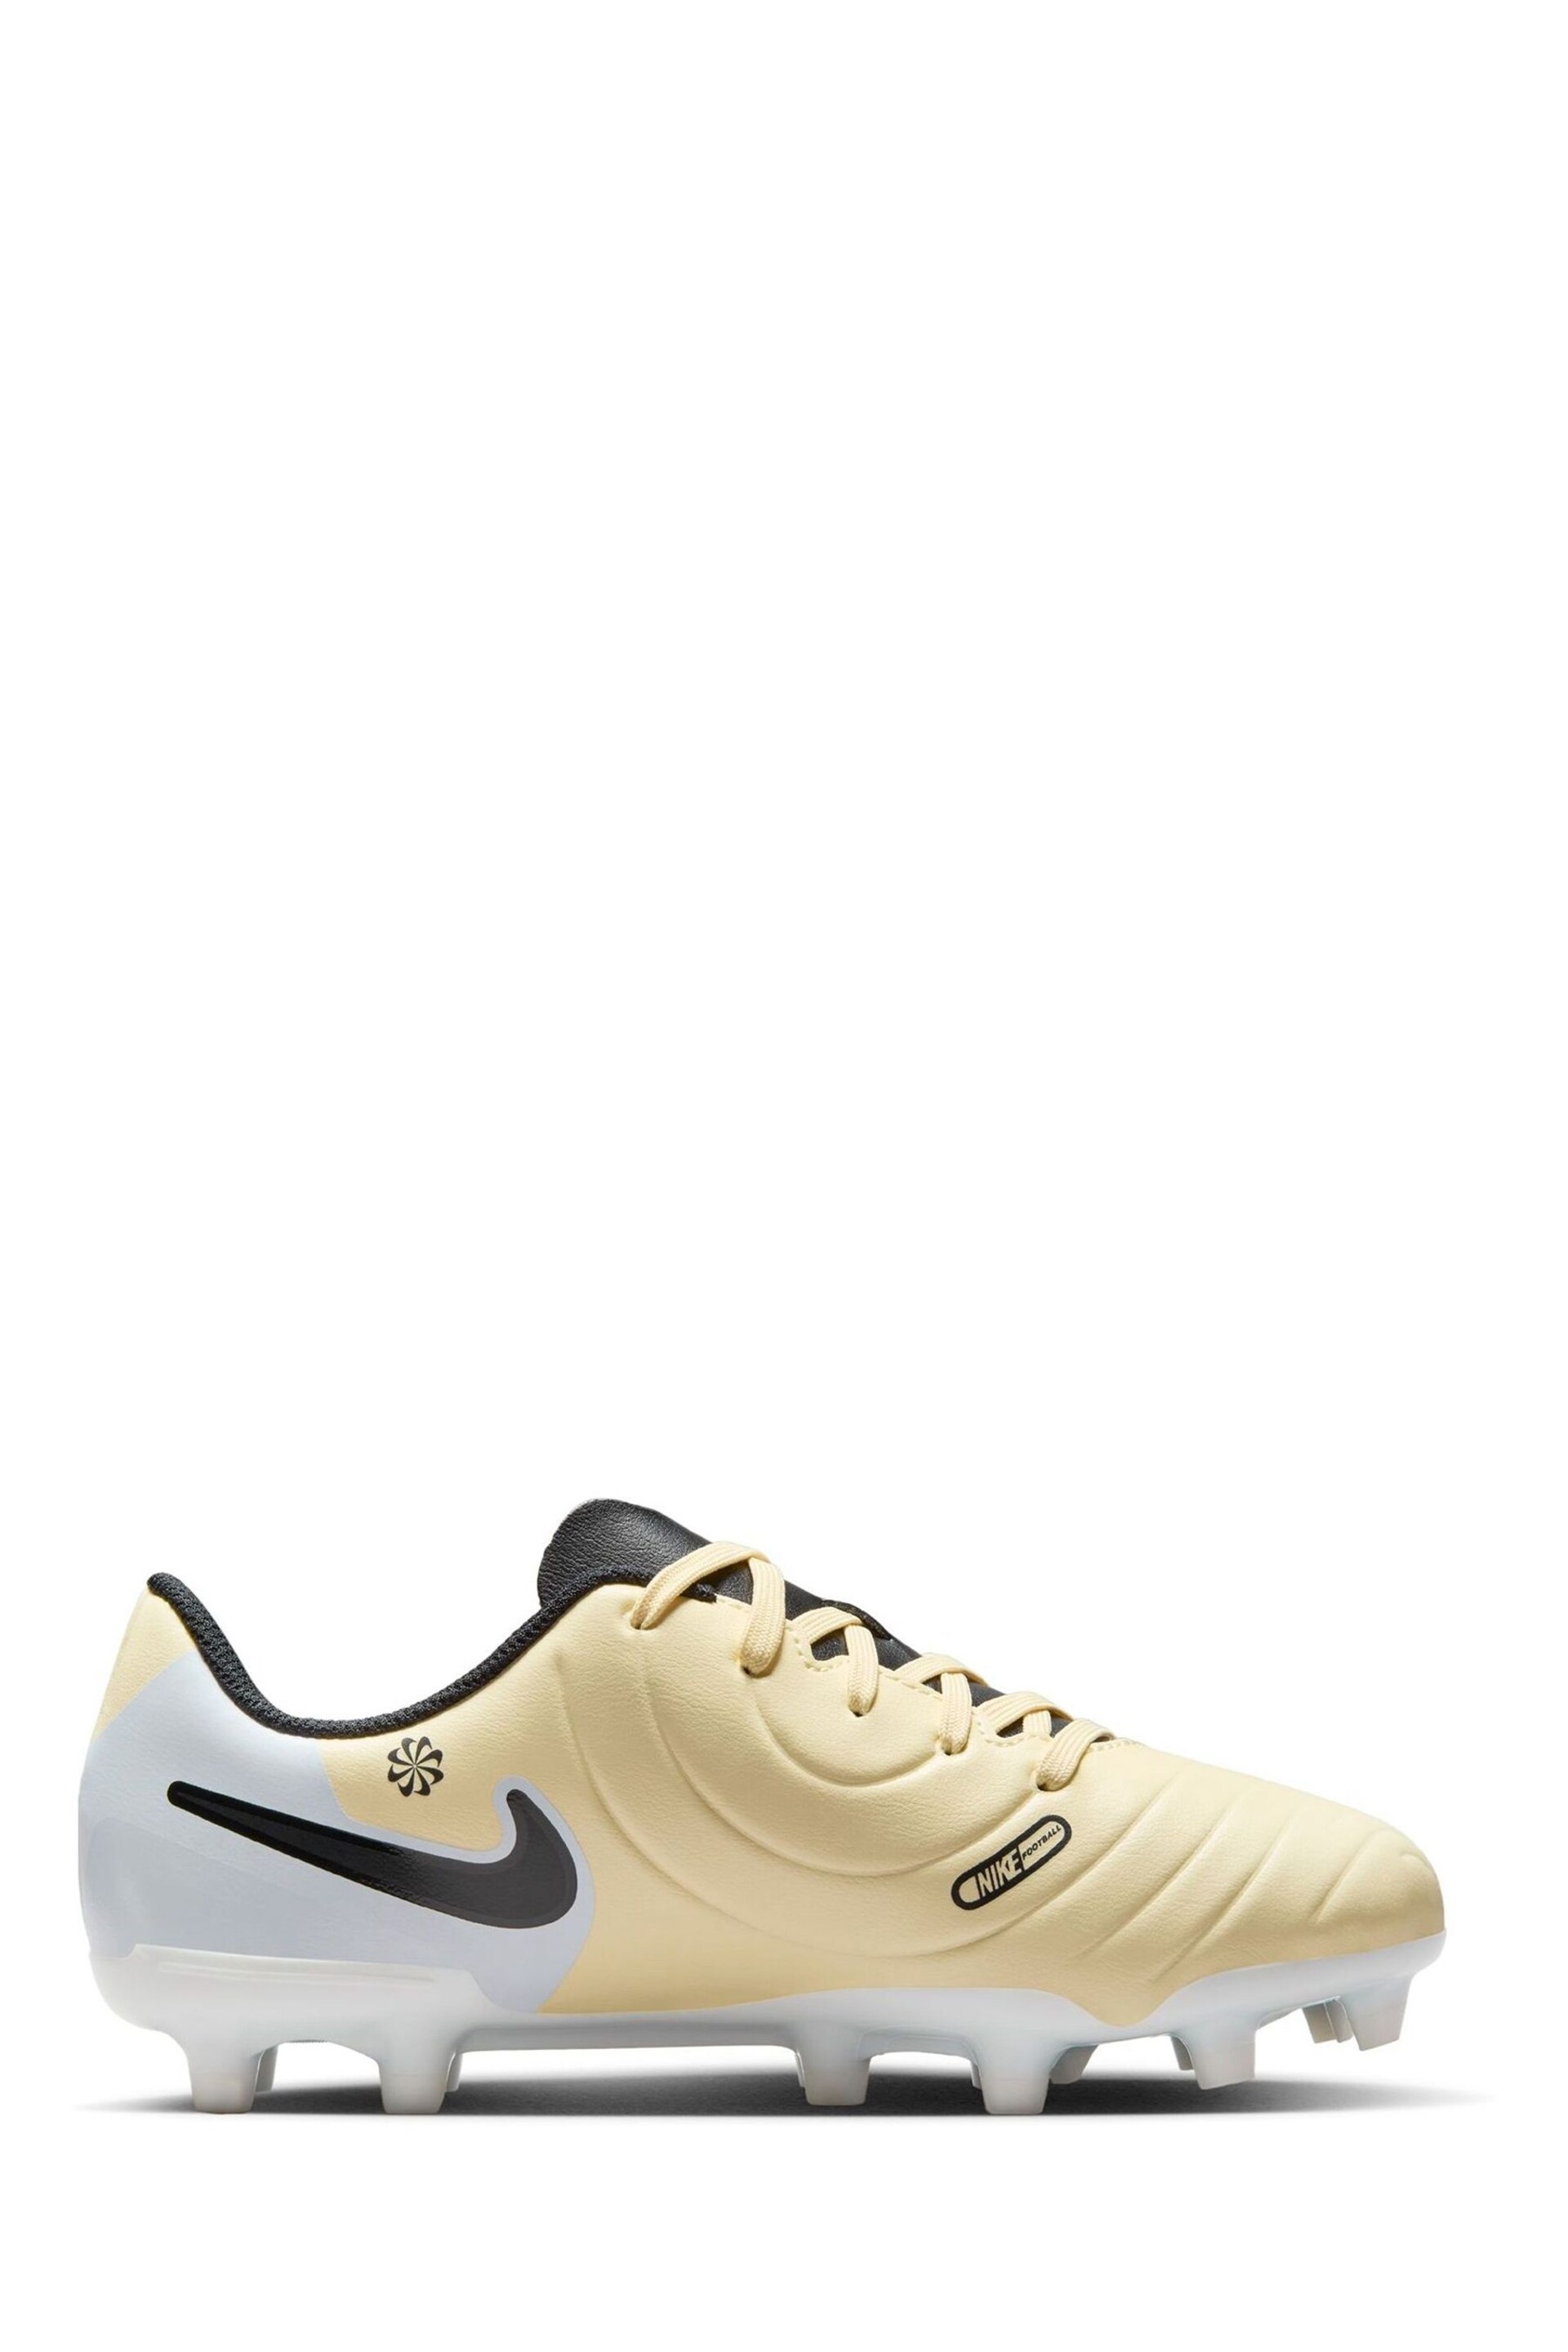 Nike Yellow Jr Tiempo Legend 10 Club Multi Ground Football Boots - Image 1 of 11